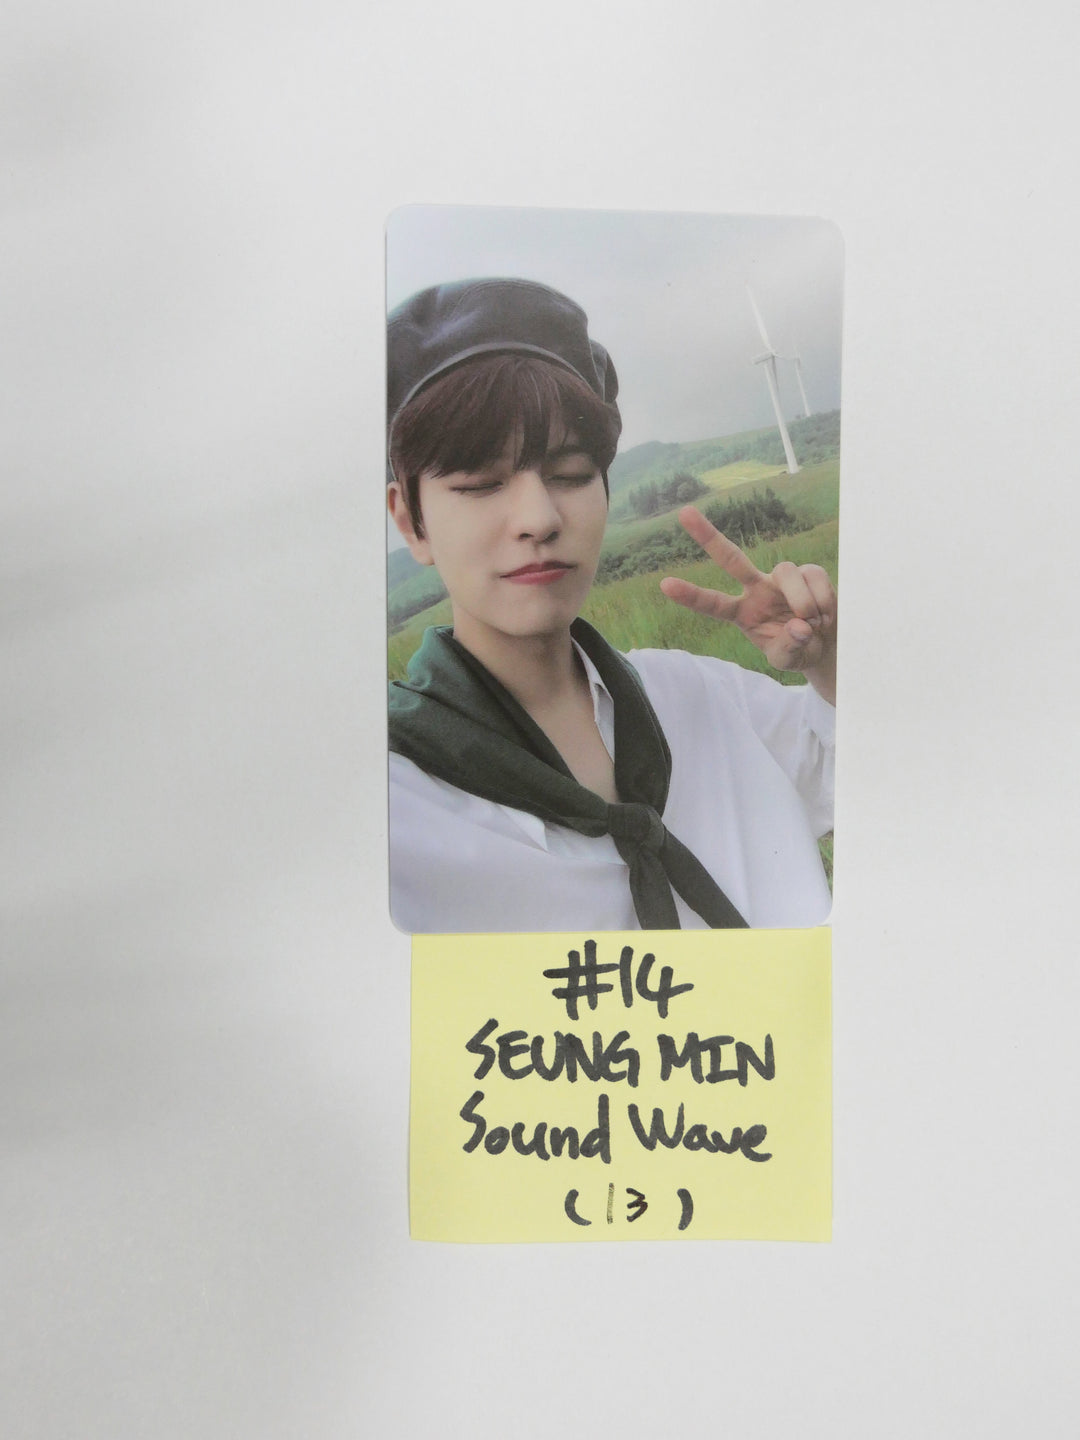 Stray Kids 'No Easy' - Soundwave Luckydraw Plastic Photocard + Bonus Message Card Round 1 (Must Read)